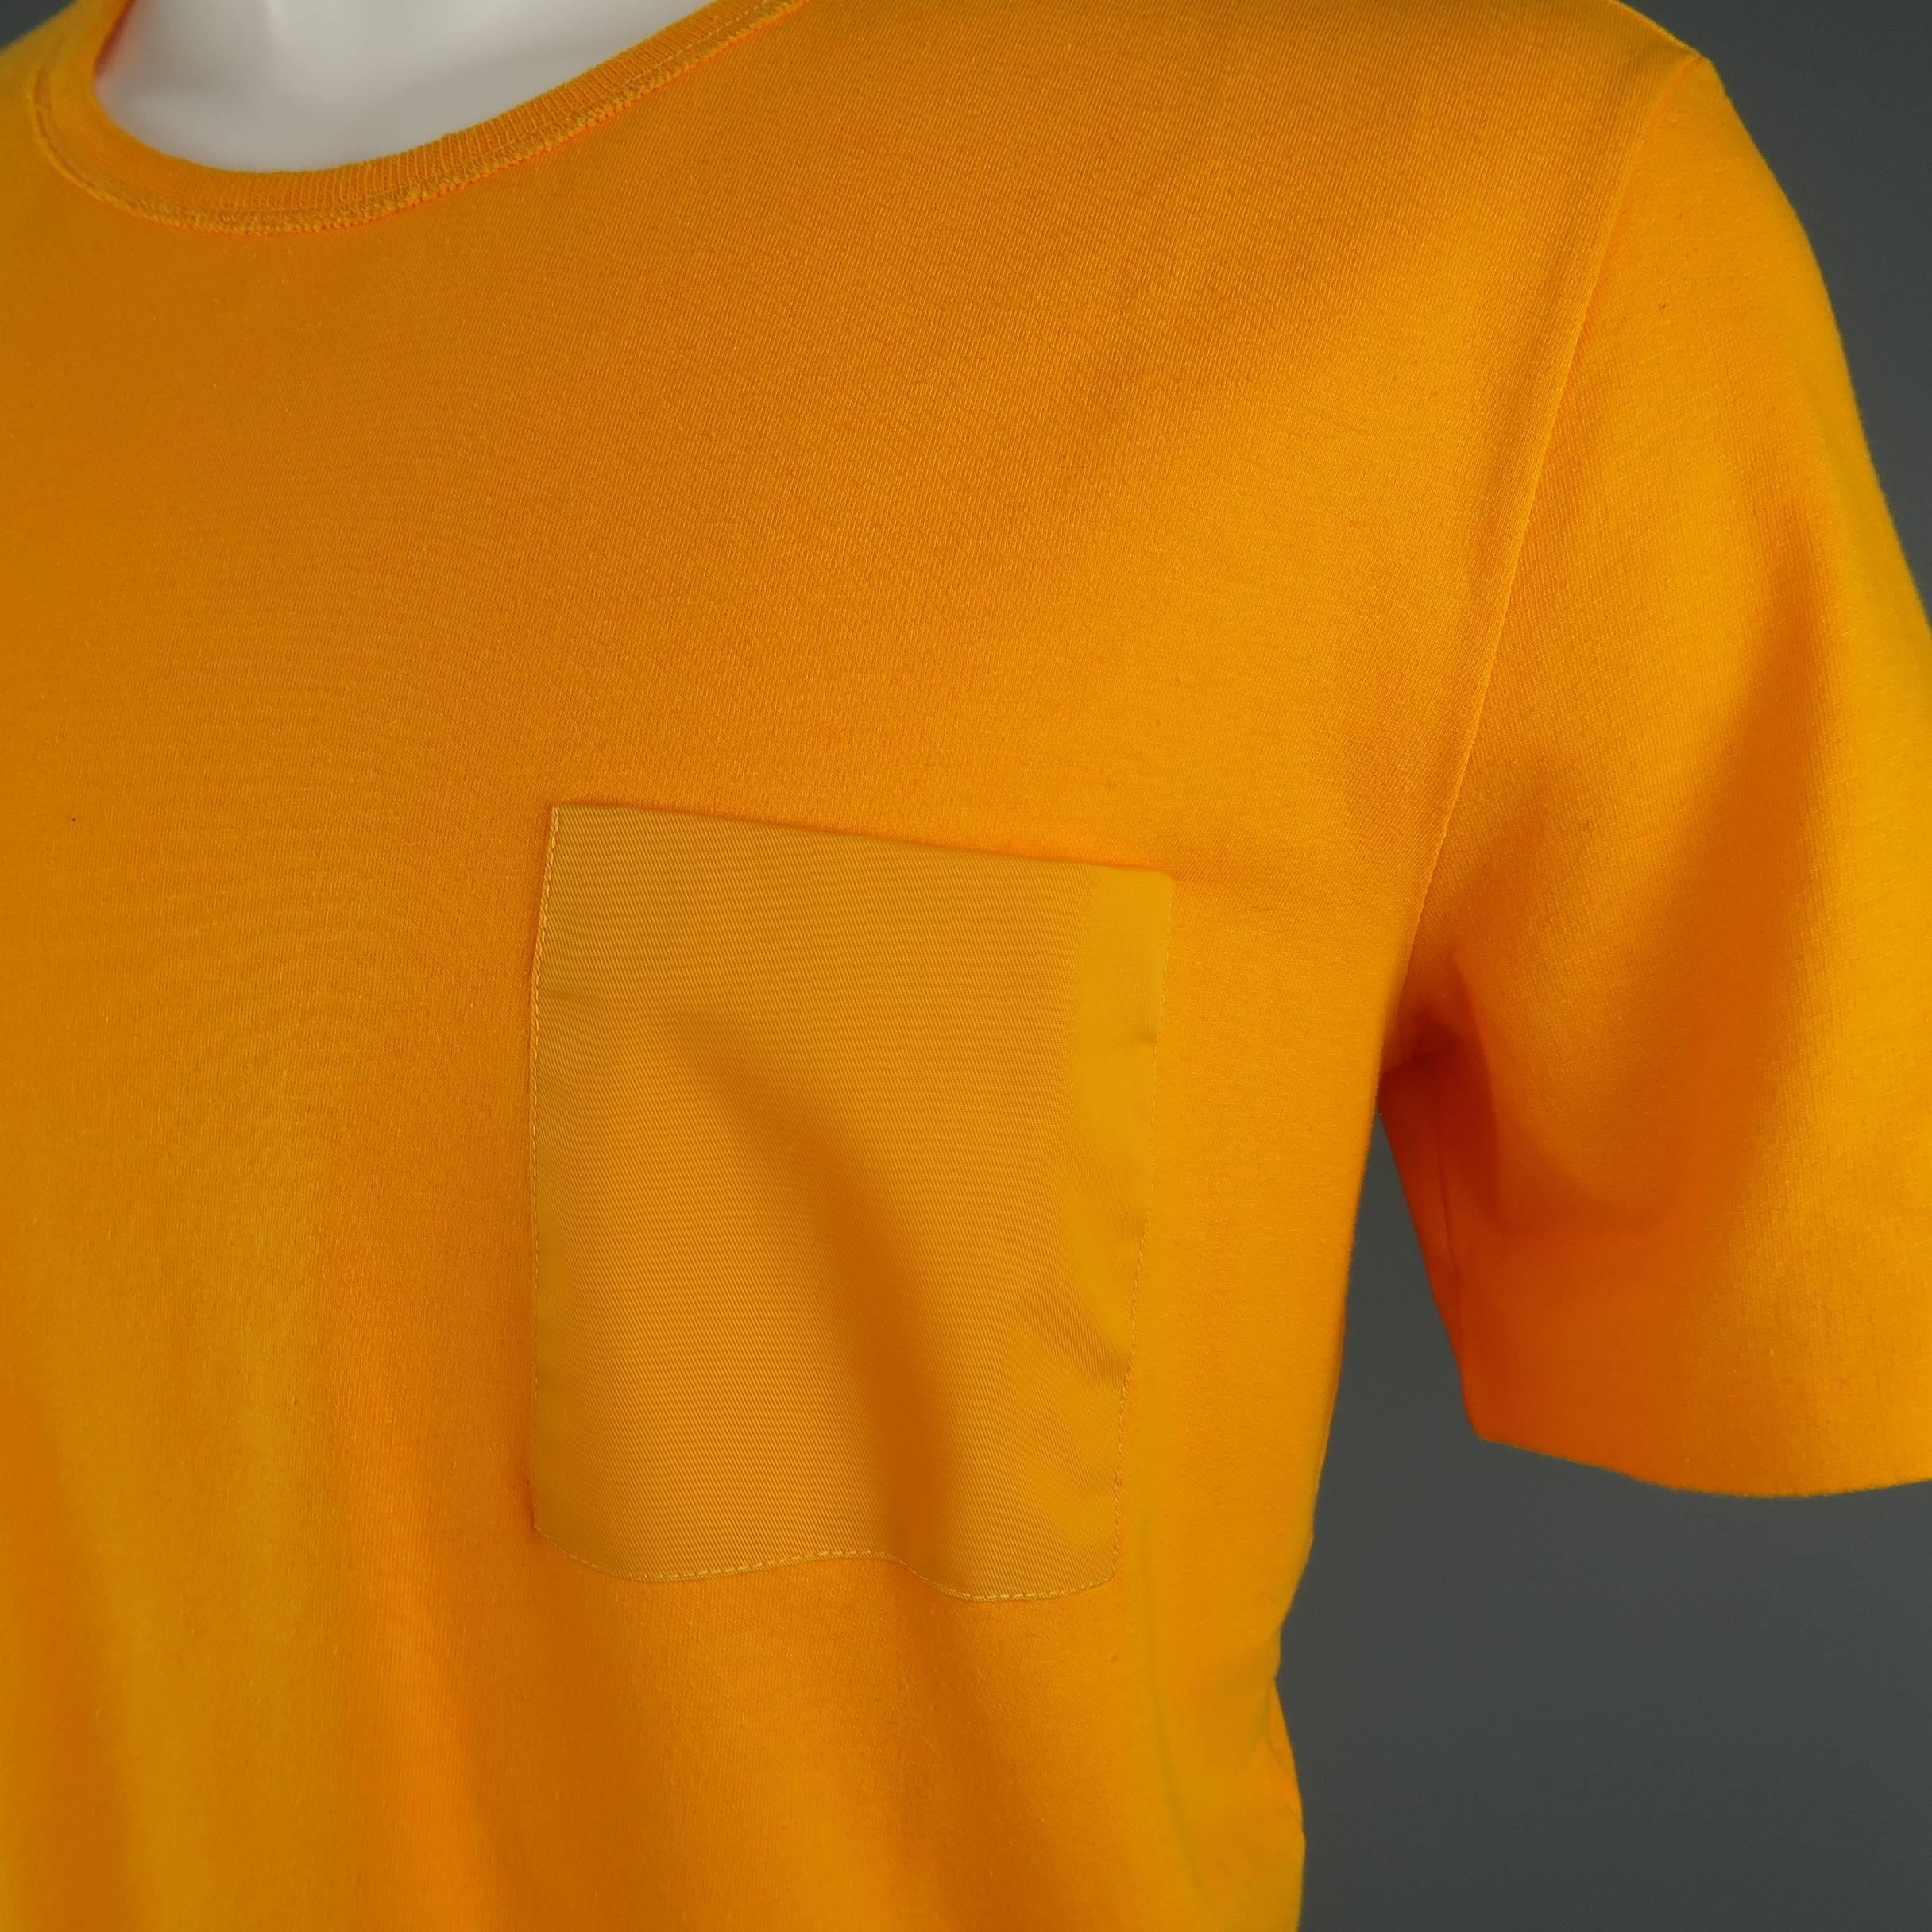 MAISON MARTIN MARGIELA T shirt comes in bold citrus goldenrod orange yellow jersey with a round neck, nylon twill breast pocket, and signature white stitches at back. Made in Italy.
 
Excellent Pre-Owned Condition.
Marked: IT 50
 
Measurements:
